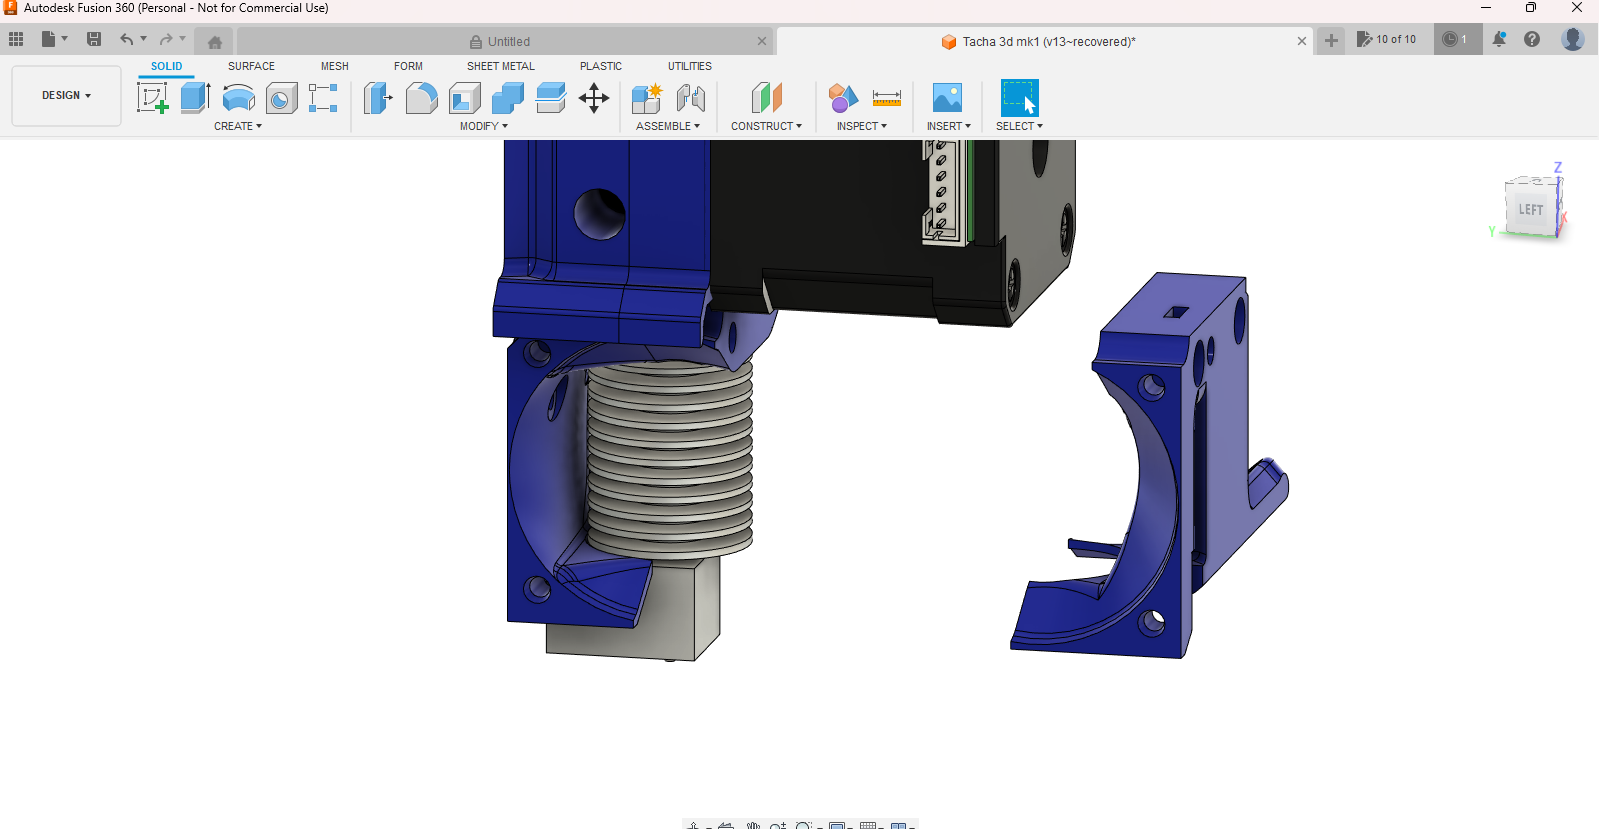 Autodesk Fusion 360 (Personal - Not for Commercial Use) 6_29_2023 10_03_59 PM.png